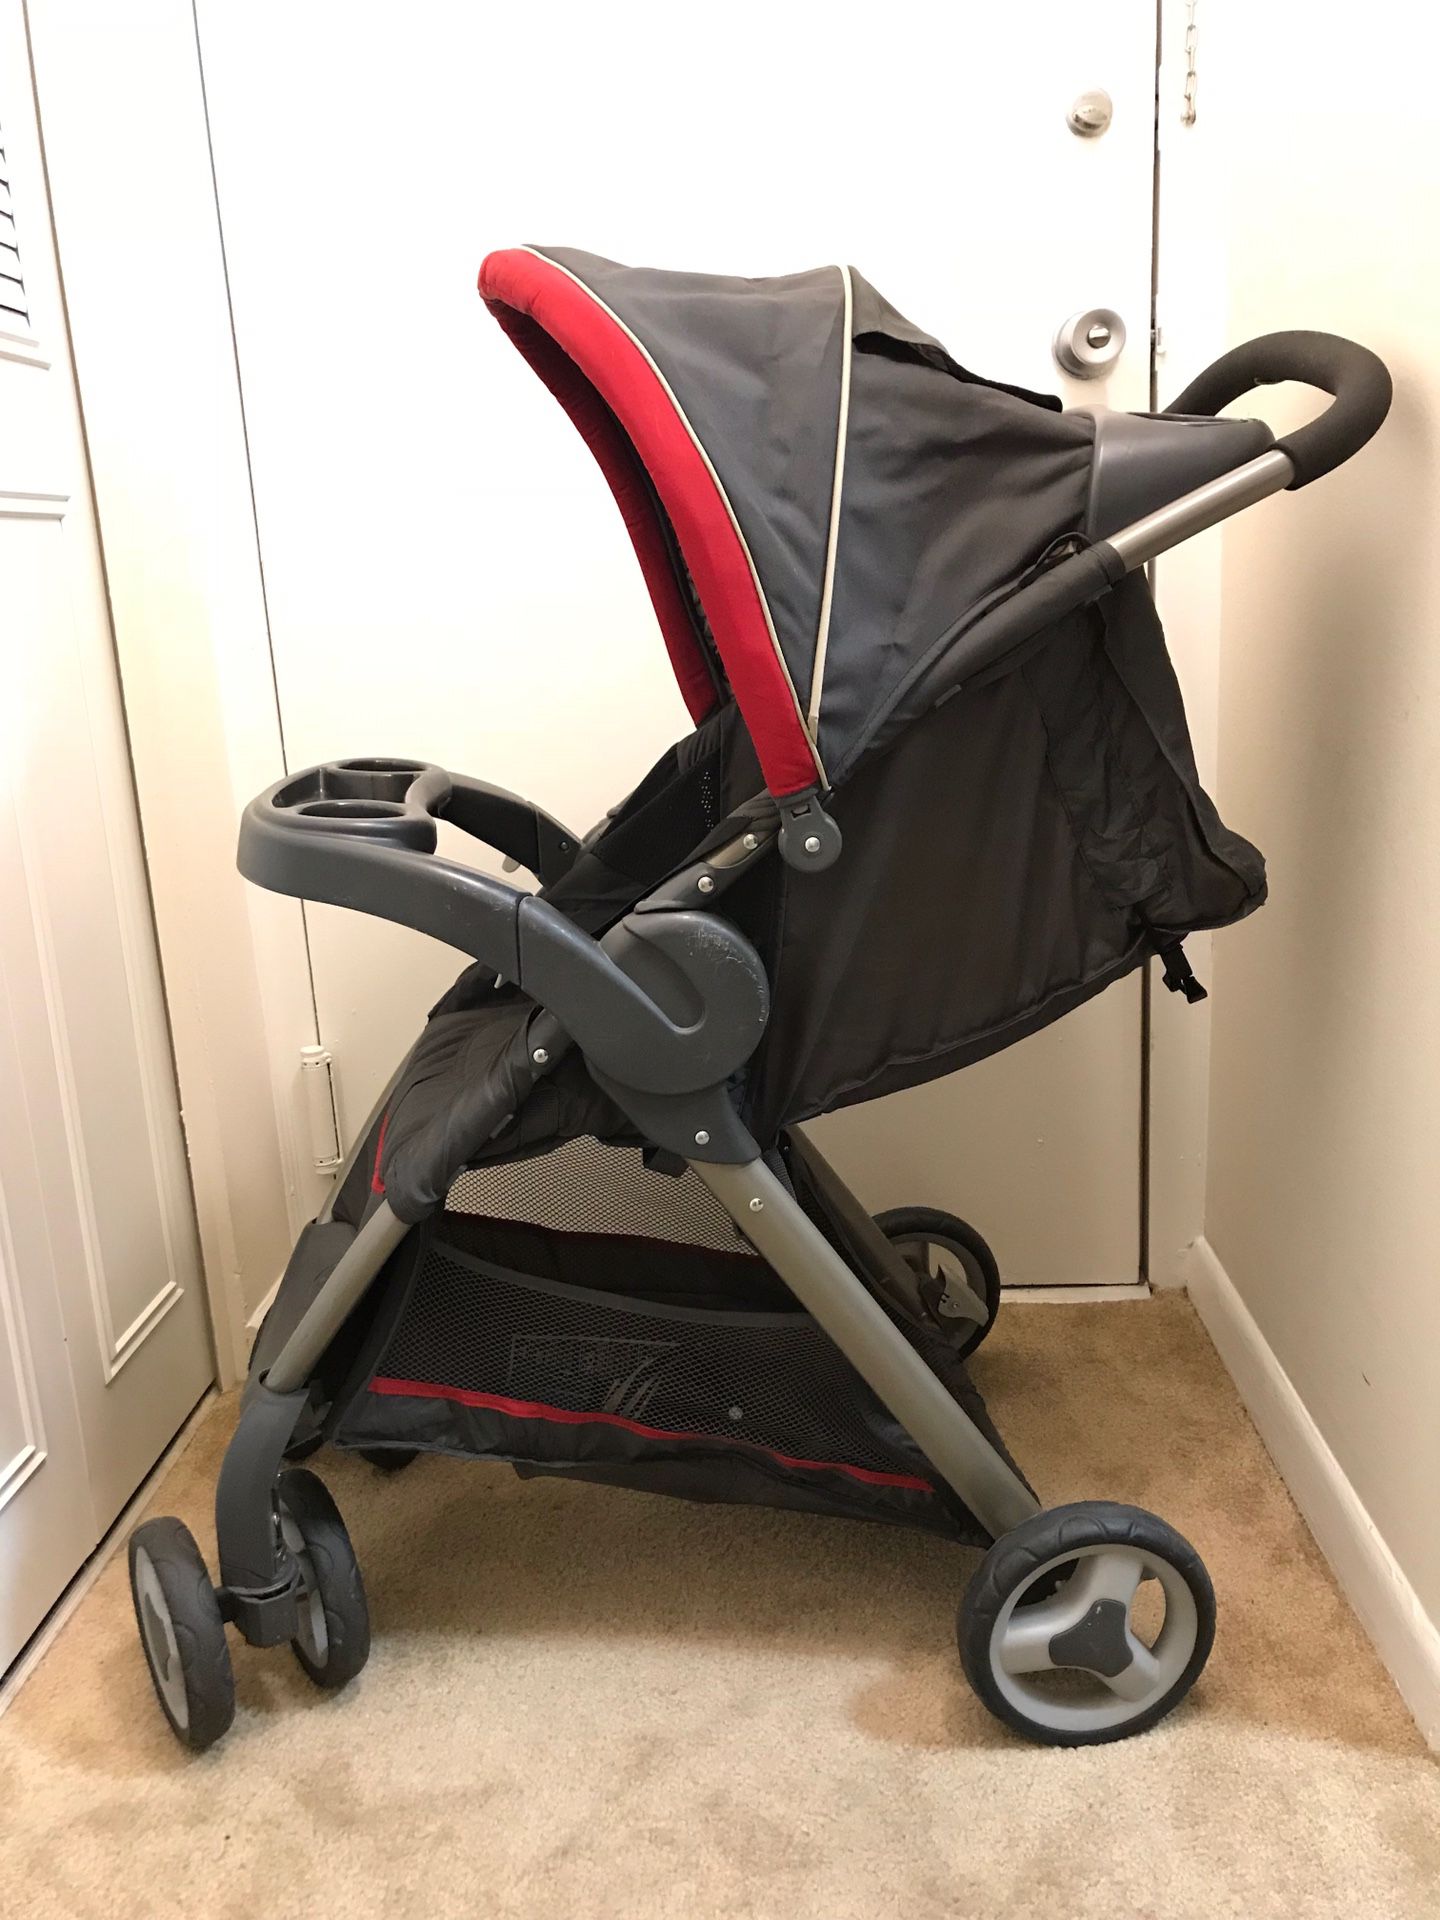 Graco car seat with stroller